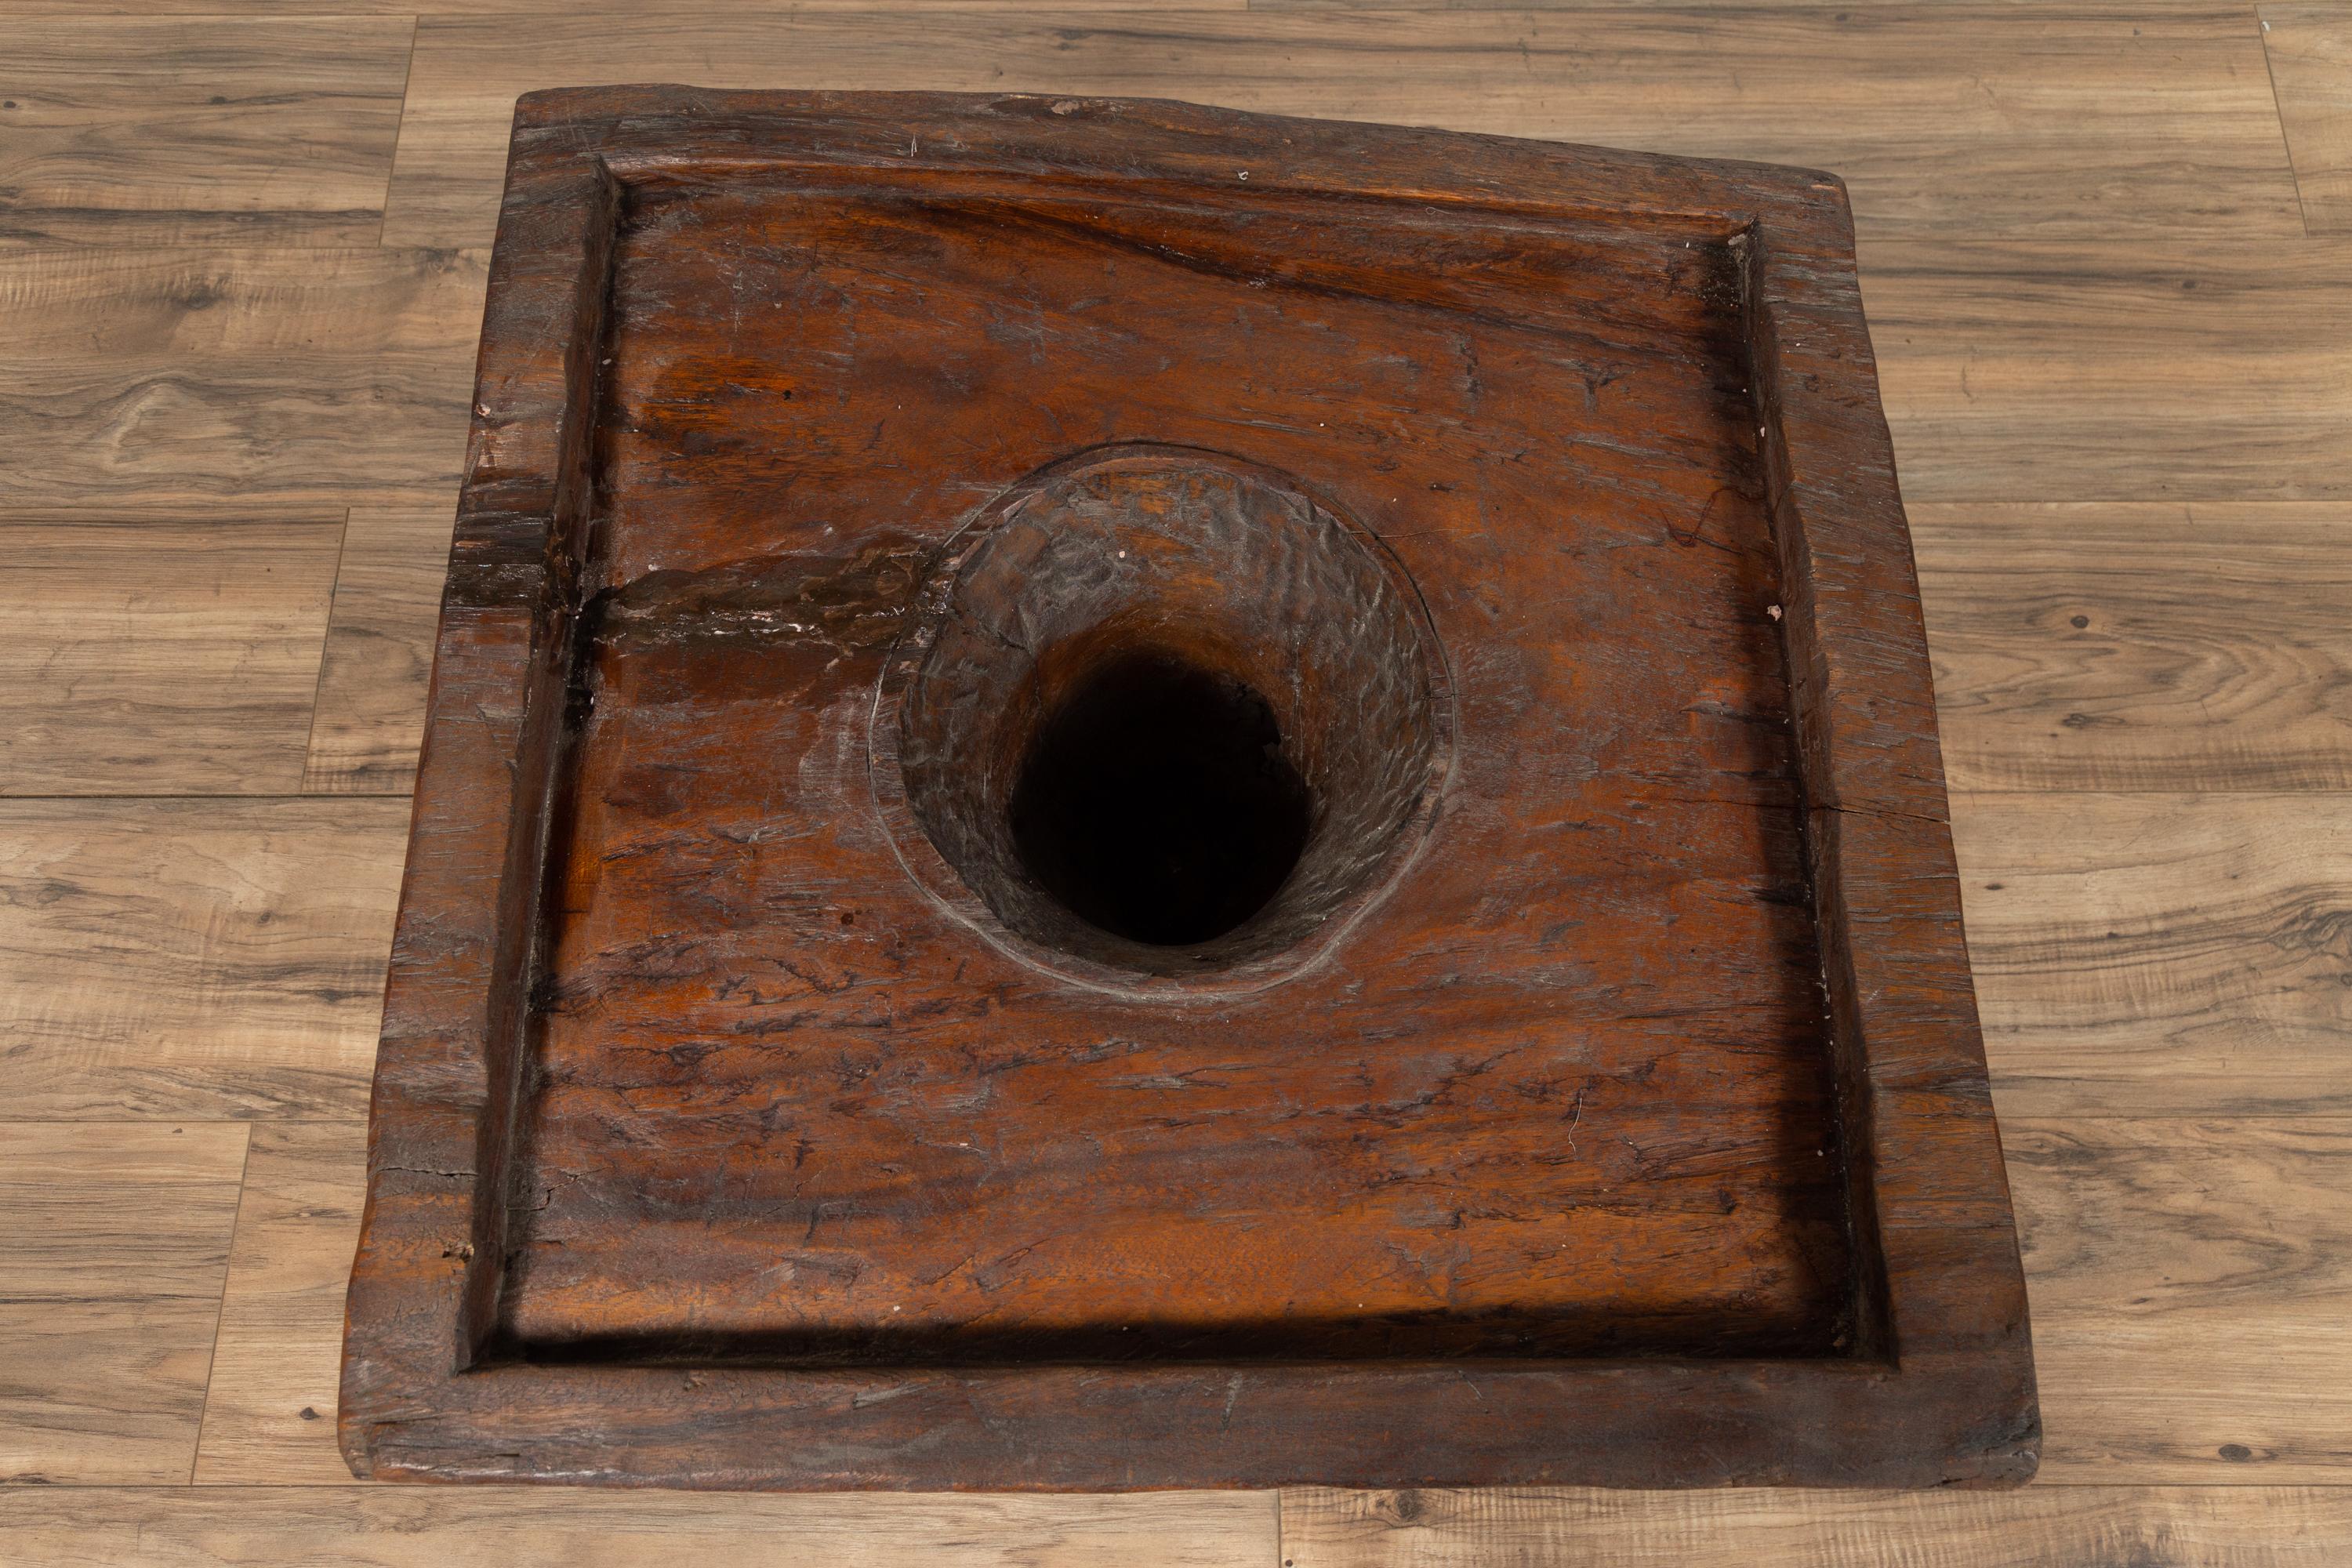 Rustic Wooden Indonesian Brown Mortar Planter from the Early 20th Century For Sale